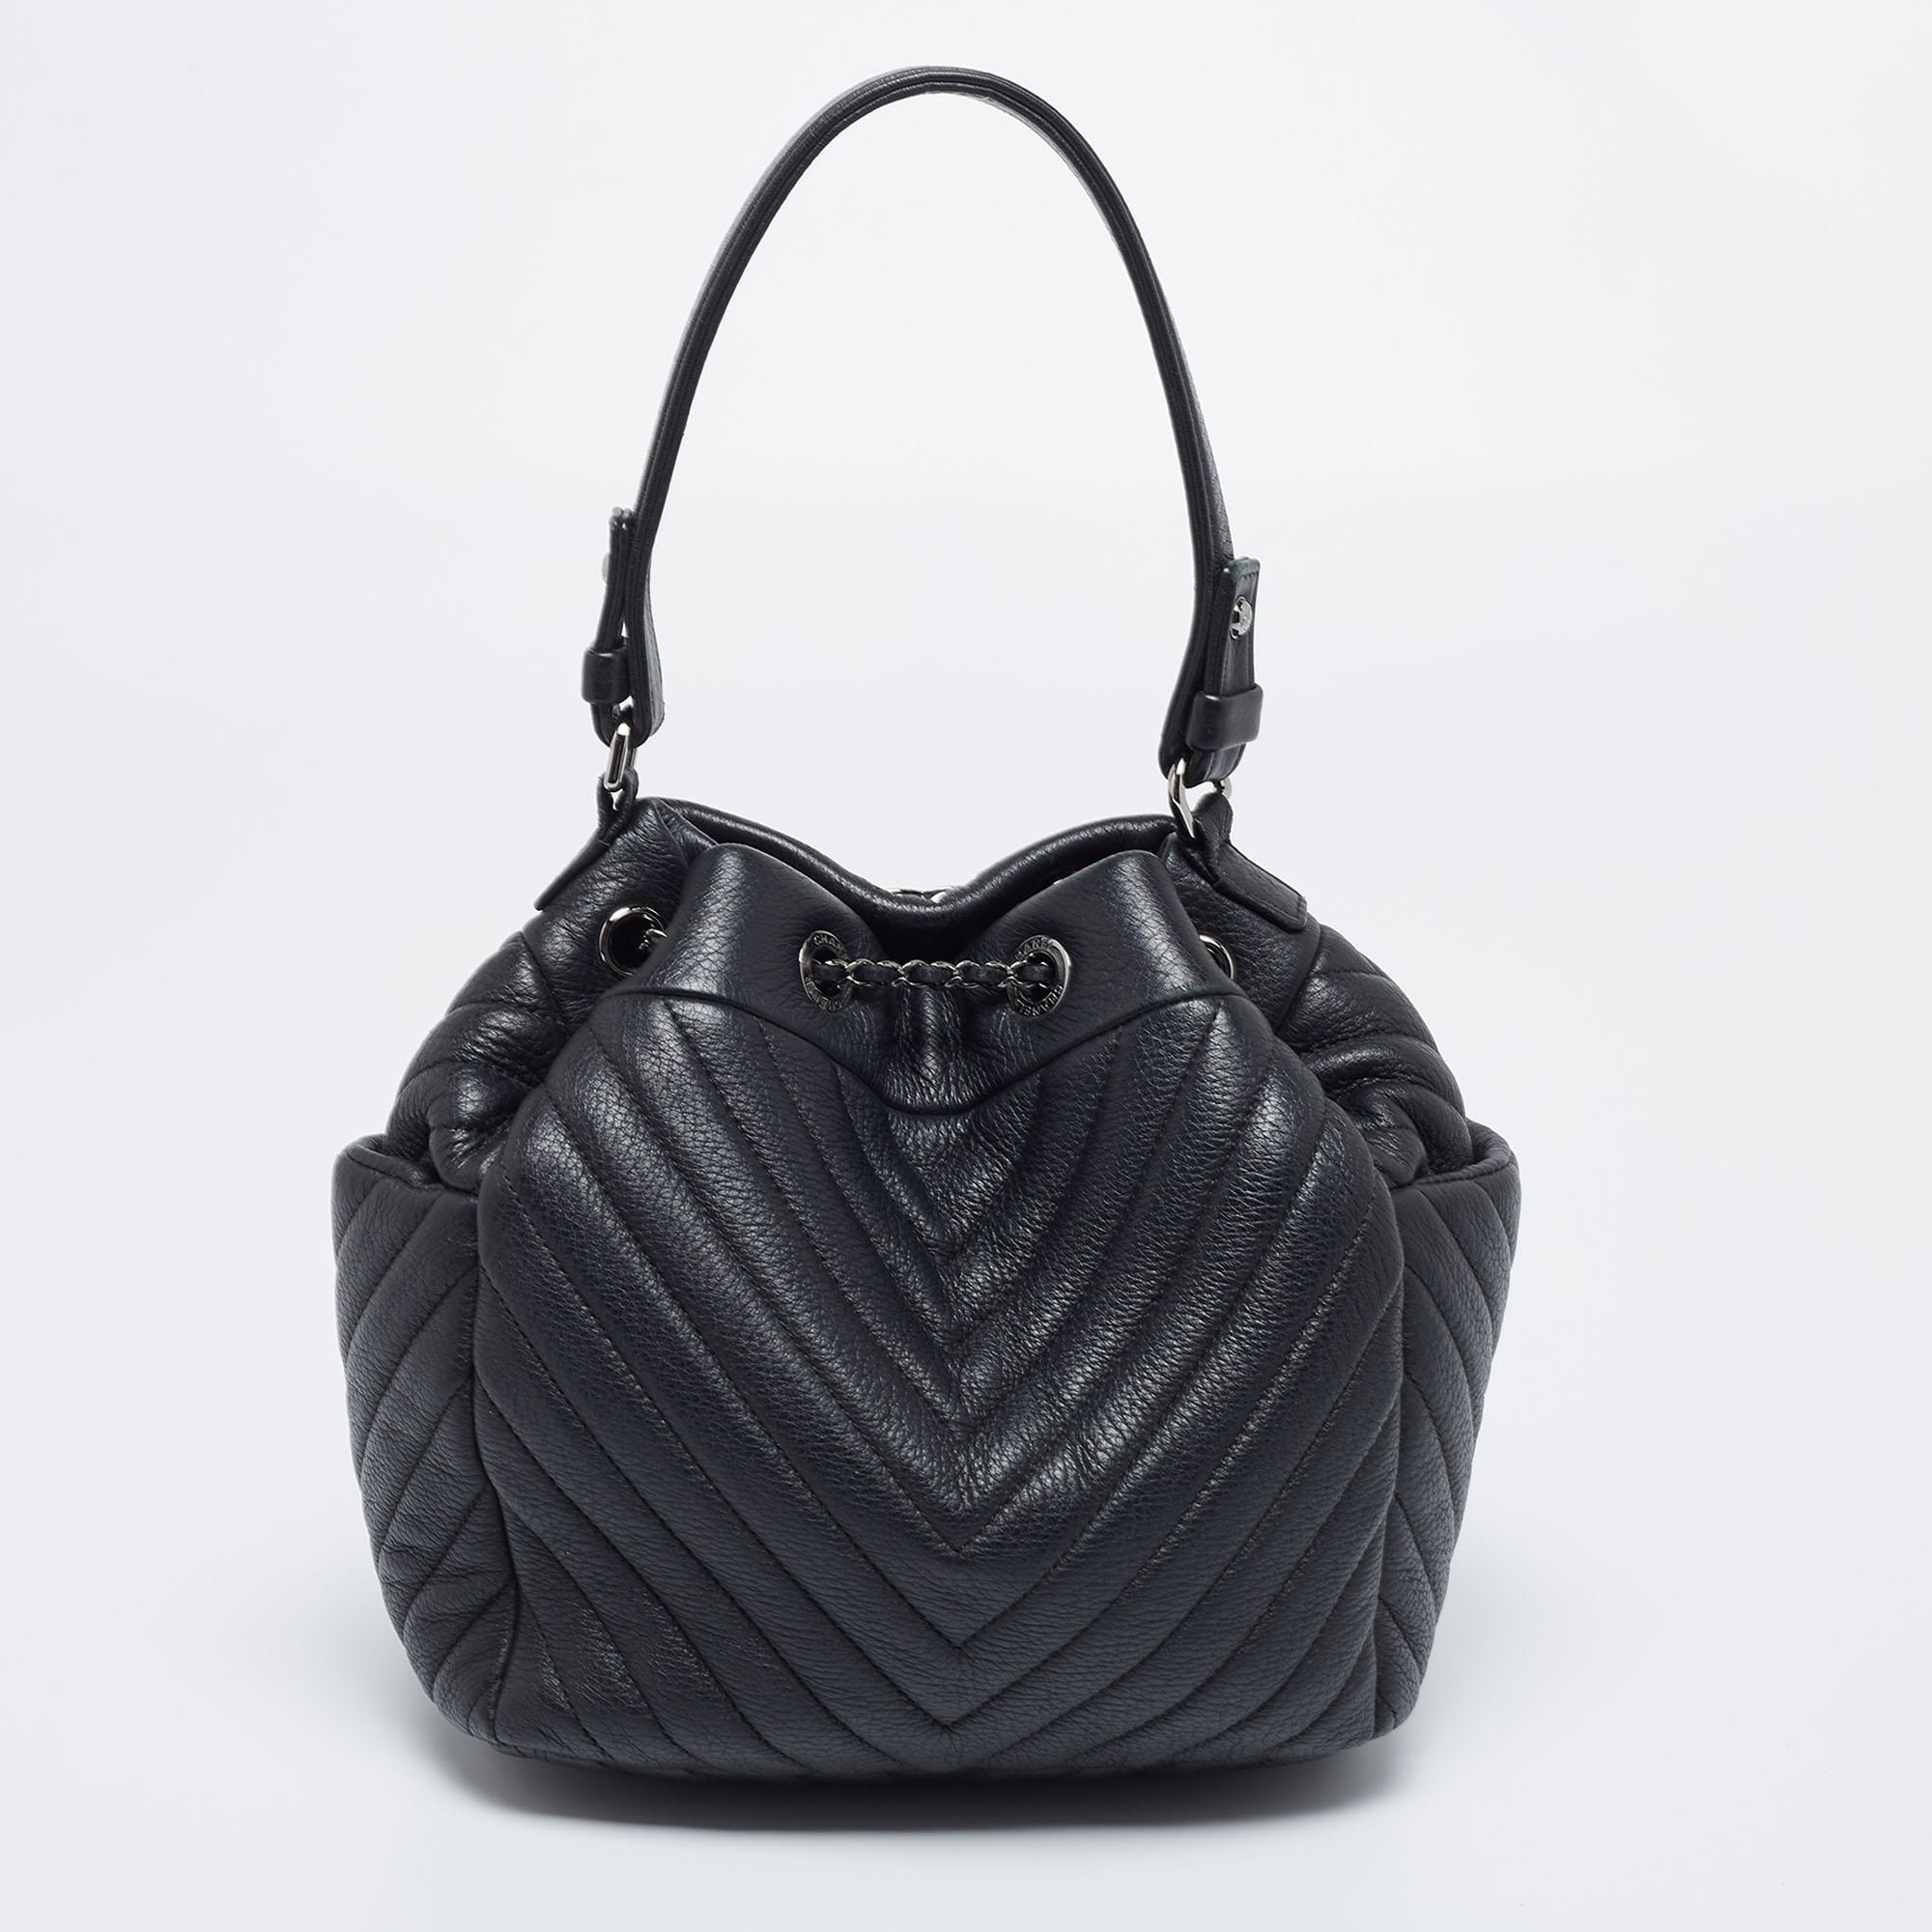 Made to a high quality and brilliant finish, this bucket bag from Chanel will be your companion for years to come. This chevron-quilted leather bag has canvas lining, CC-detailing woven chain drawstring, and a top handle. This accessory will be a